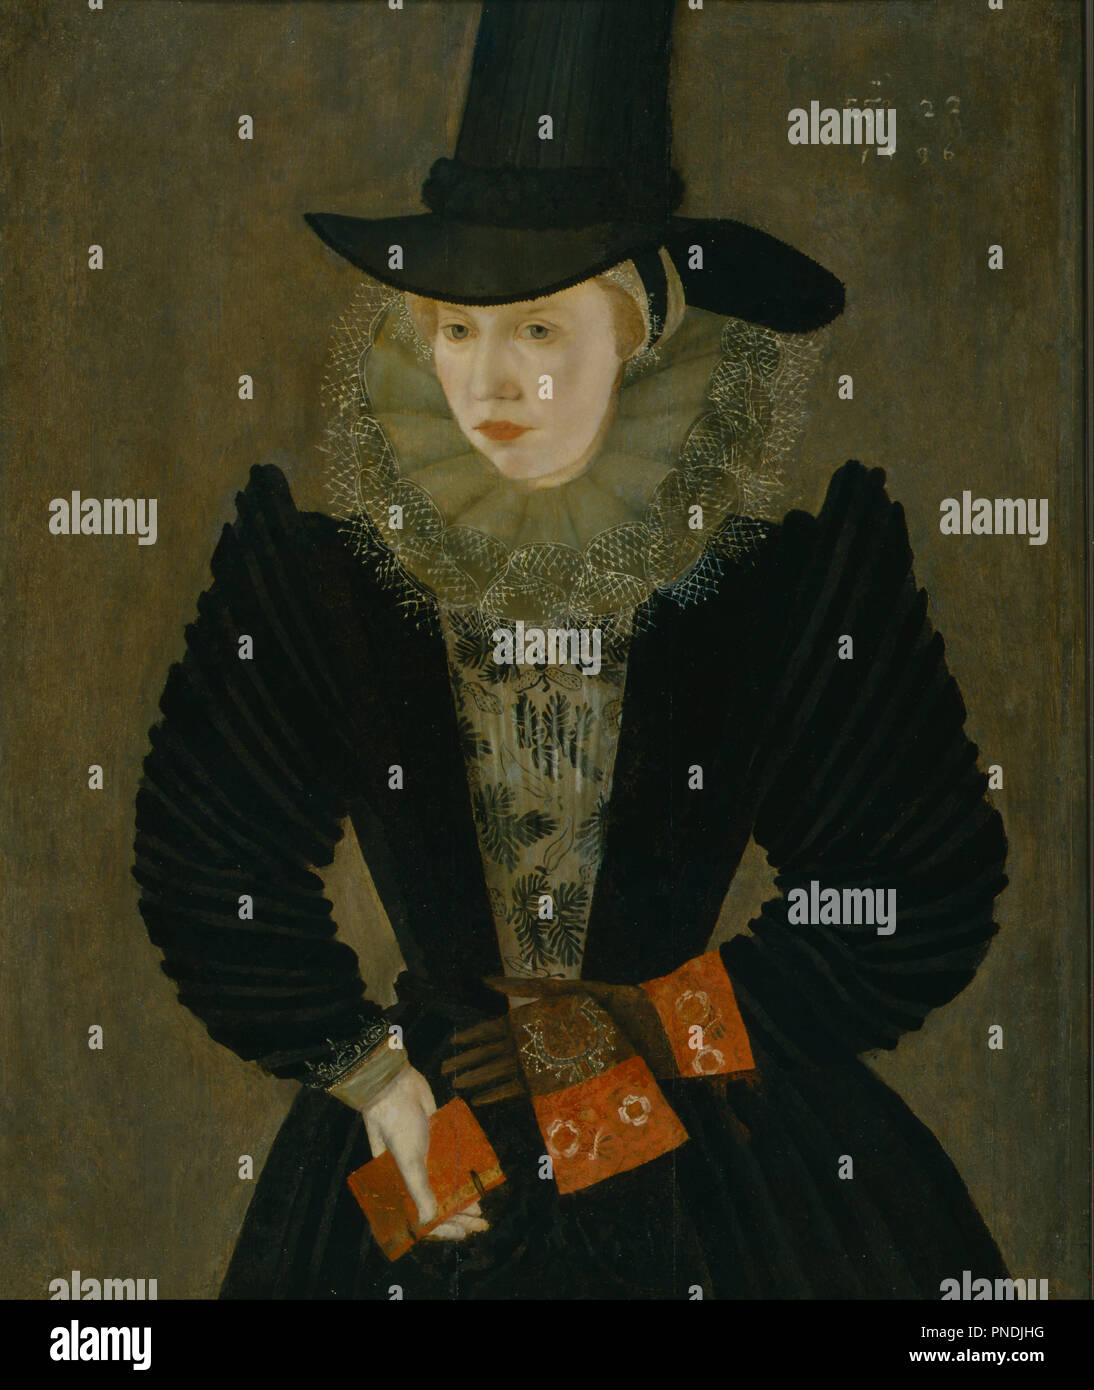 Joan Alleyn. Date/Period: Inscribed 1596. Painting. Oil on panel Oil. Height: 791 mm (31.14 in); Width: 632 mm (24.88 in). Author: British School. Stock Photo